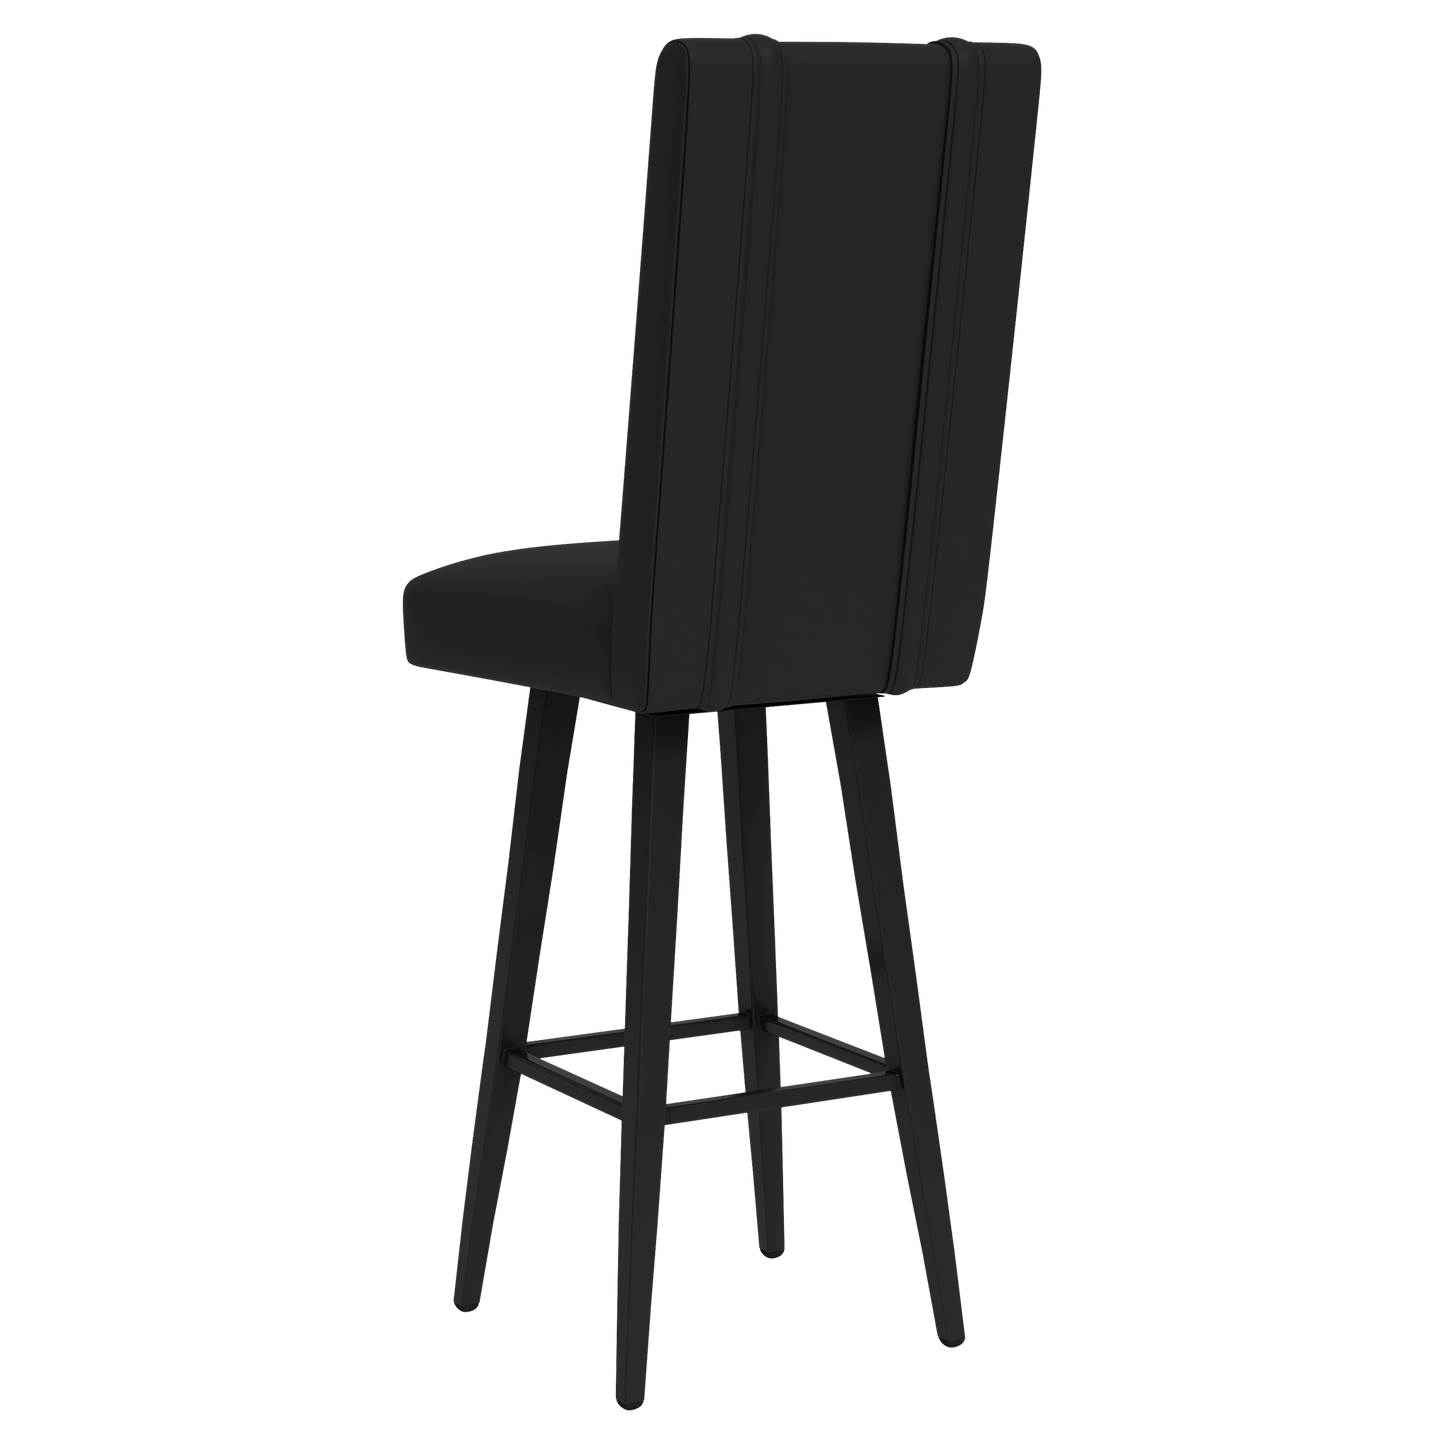 Swivel Bar Stool 2000 with Rutgers Scarlet Knights White Logo